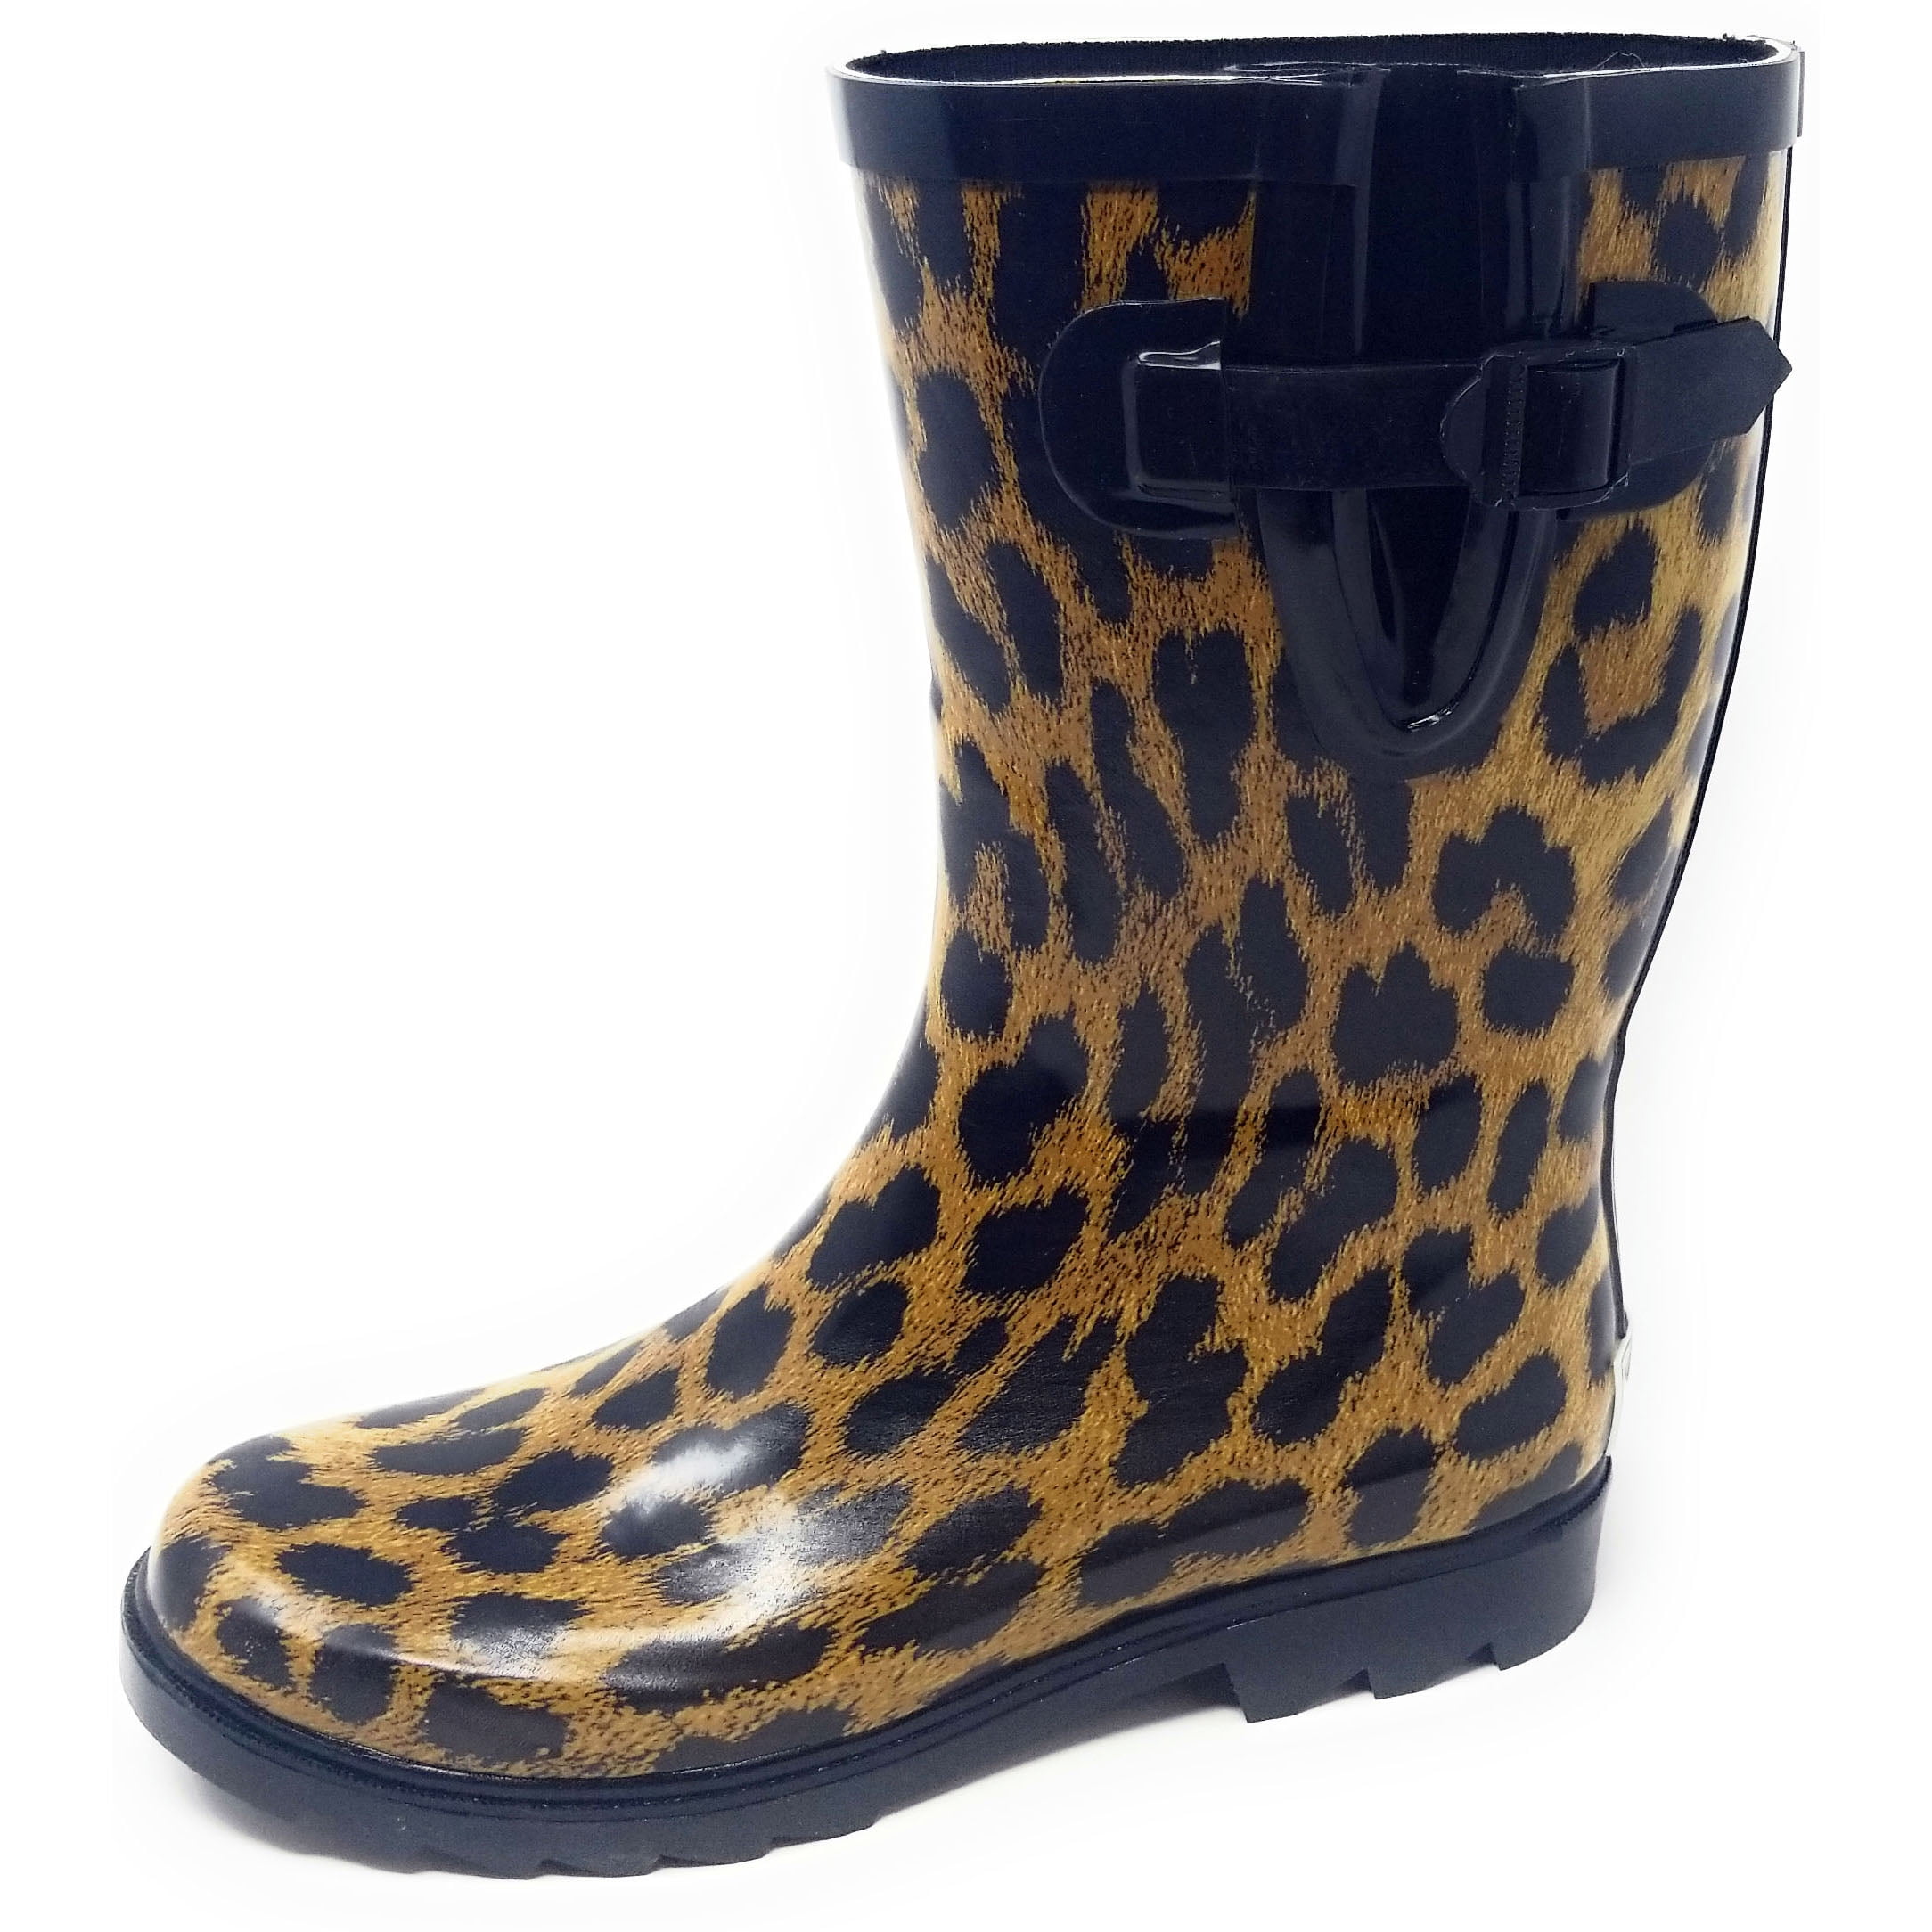 Rubber Rain Boots with Leopard Print 